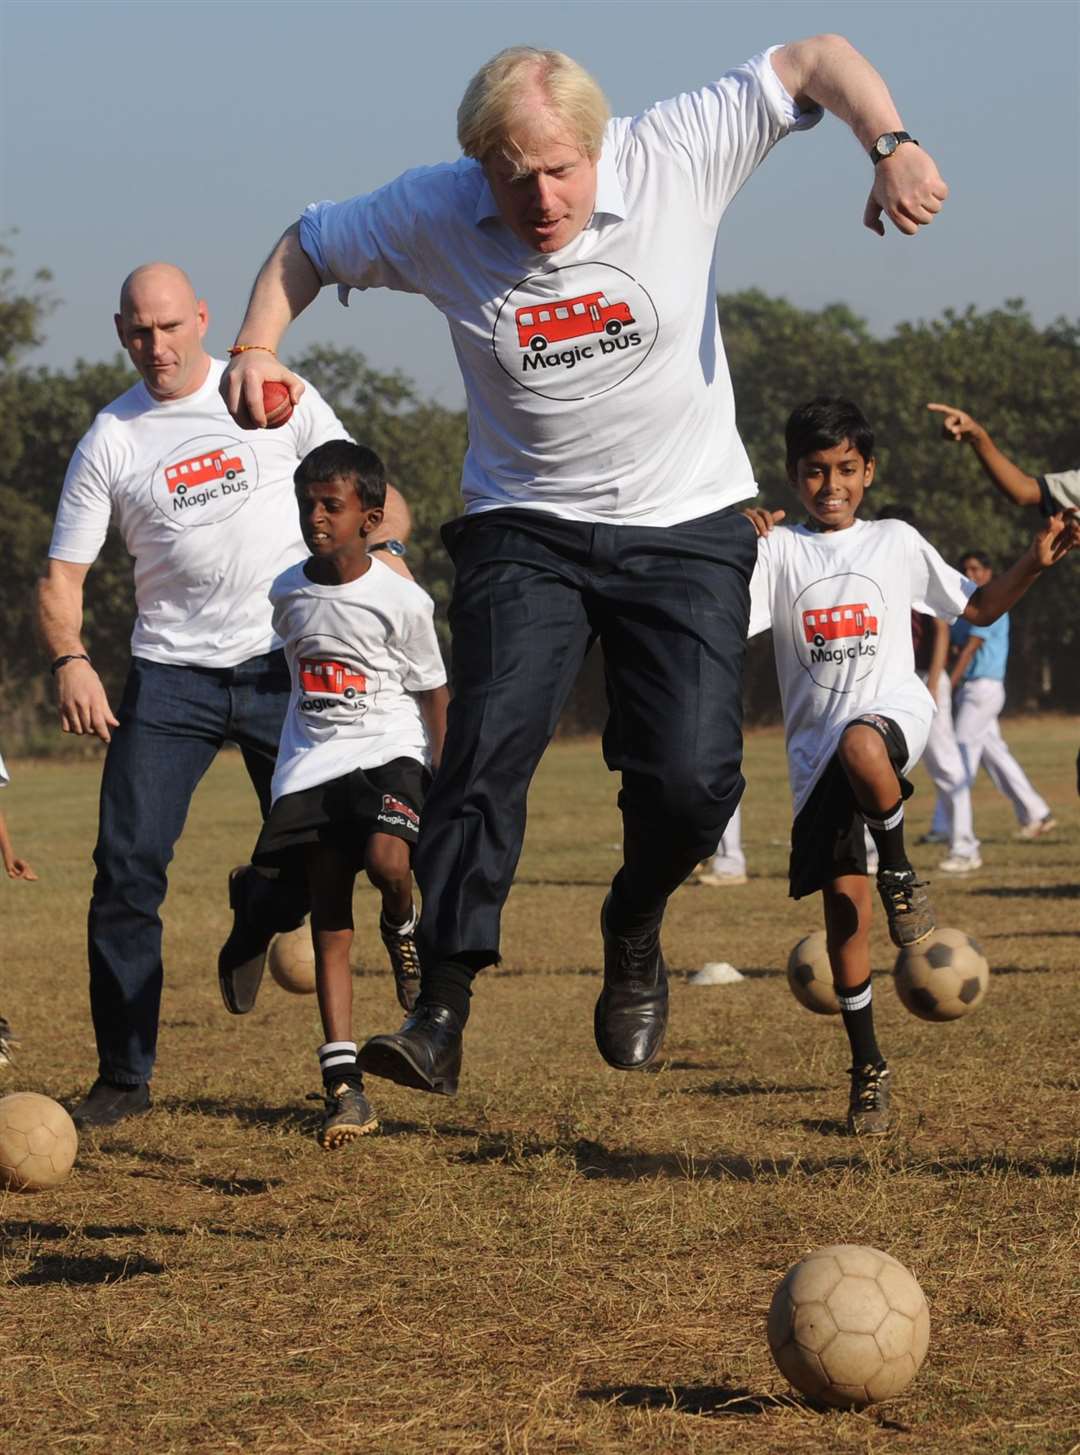 A spirited moment during the ‘ball game’ with former rugby player Lawrence Dellaglio and local children involved in the Magic Bus Project during a visit to in Mumbai in 2012 (Stefan Rousseau/PA)